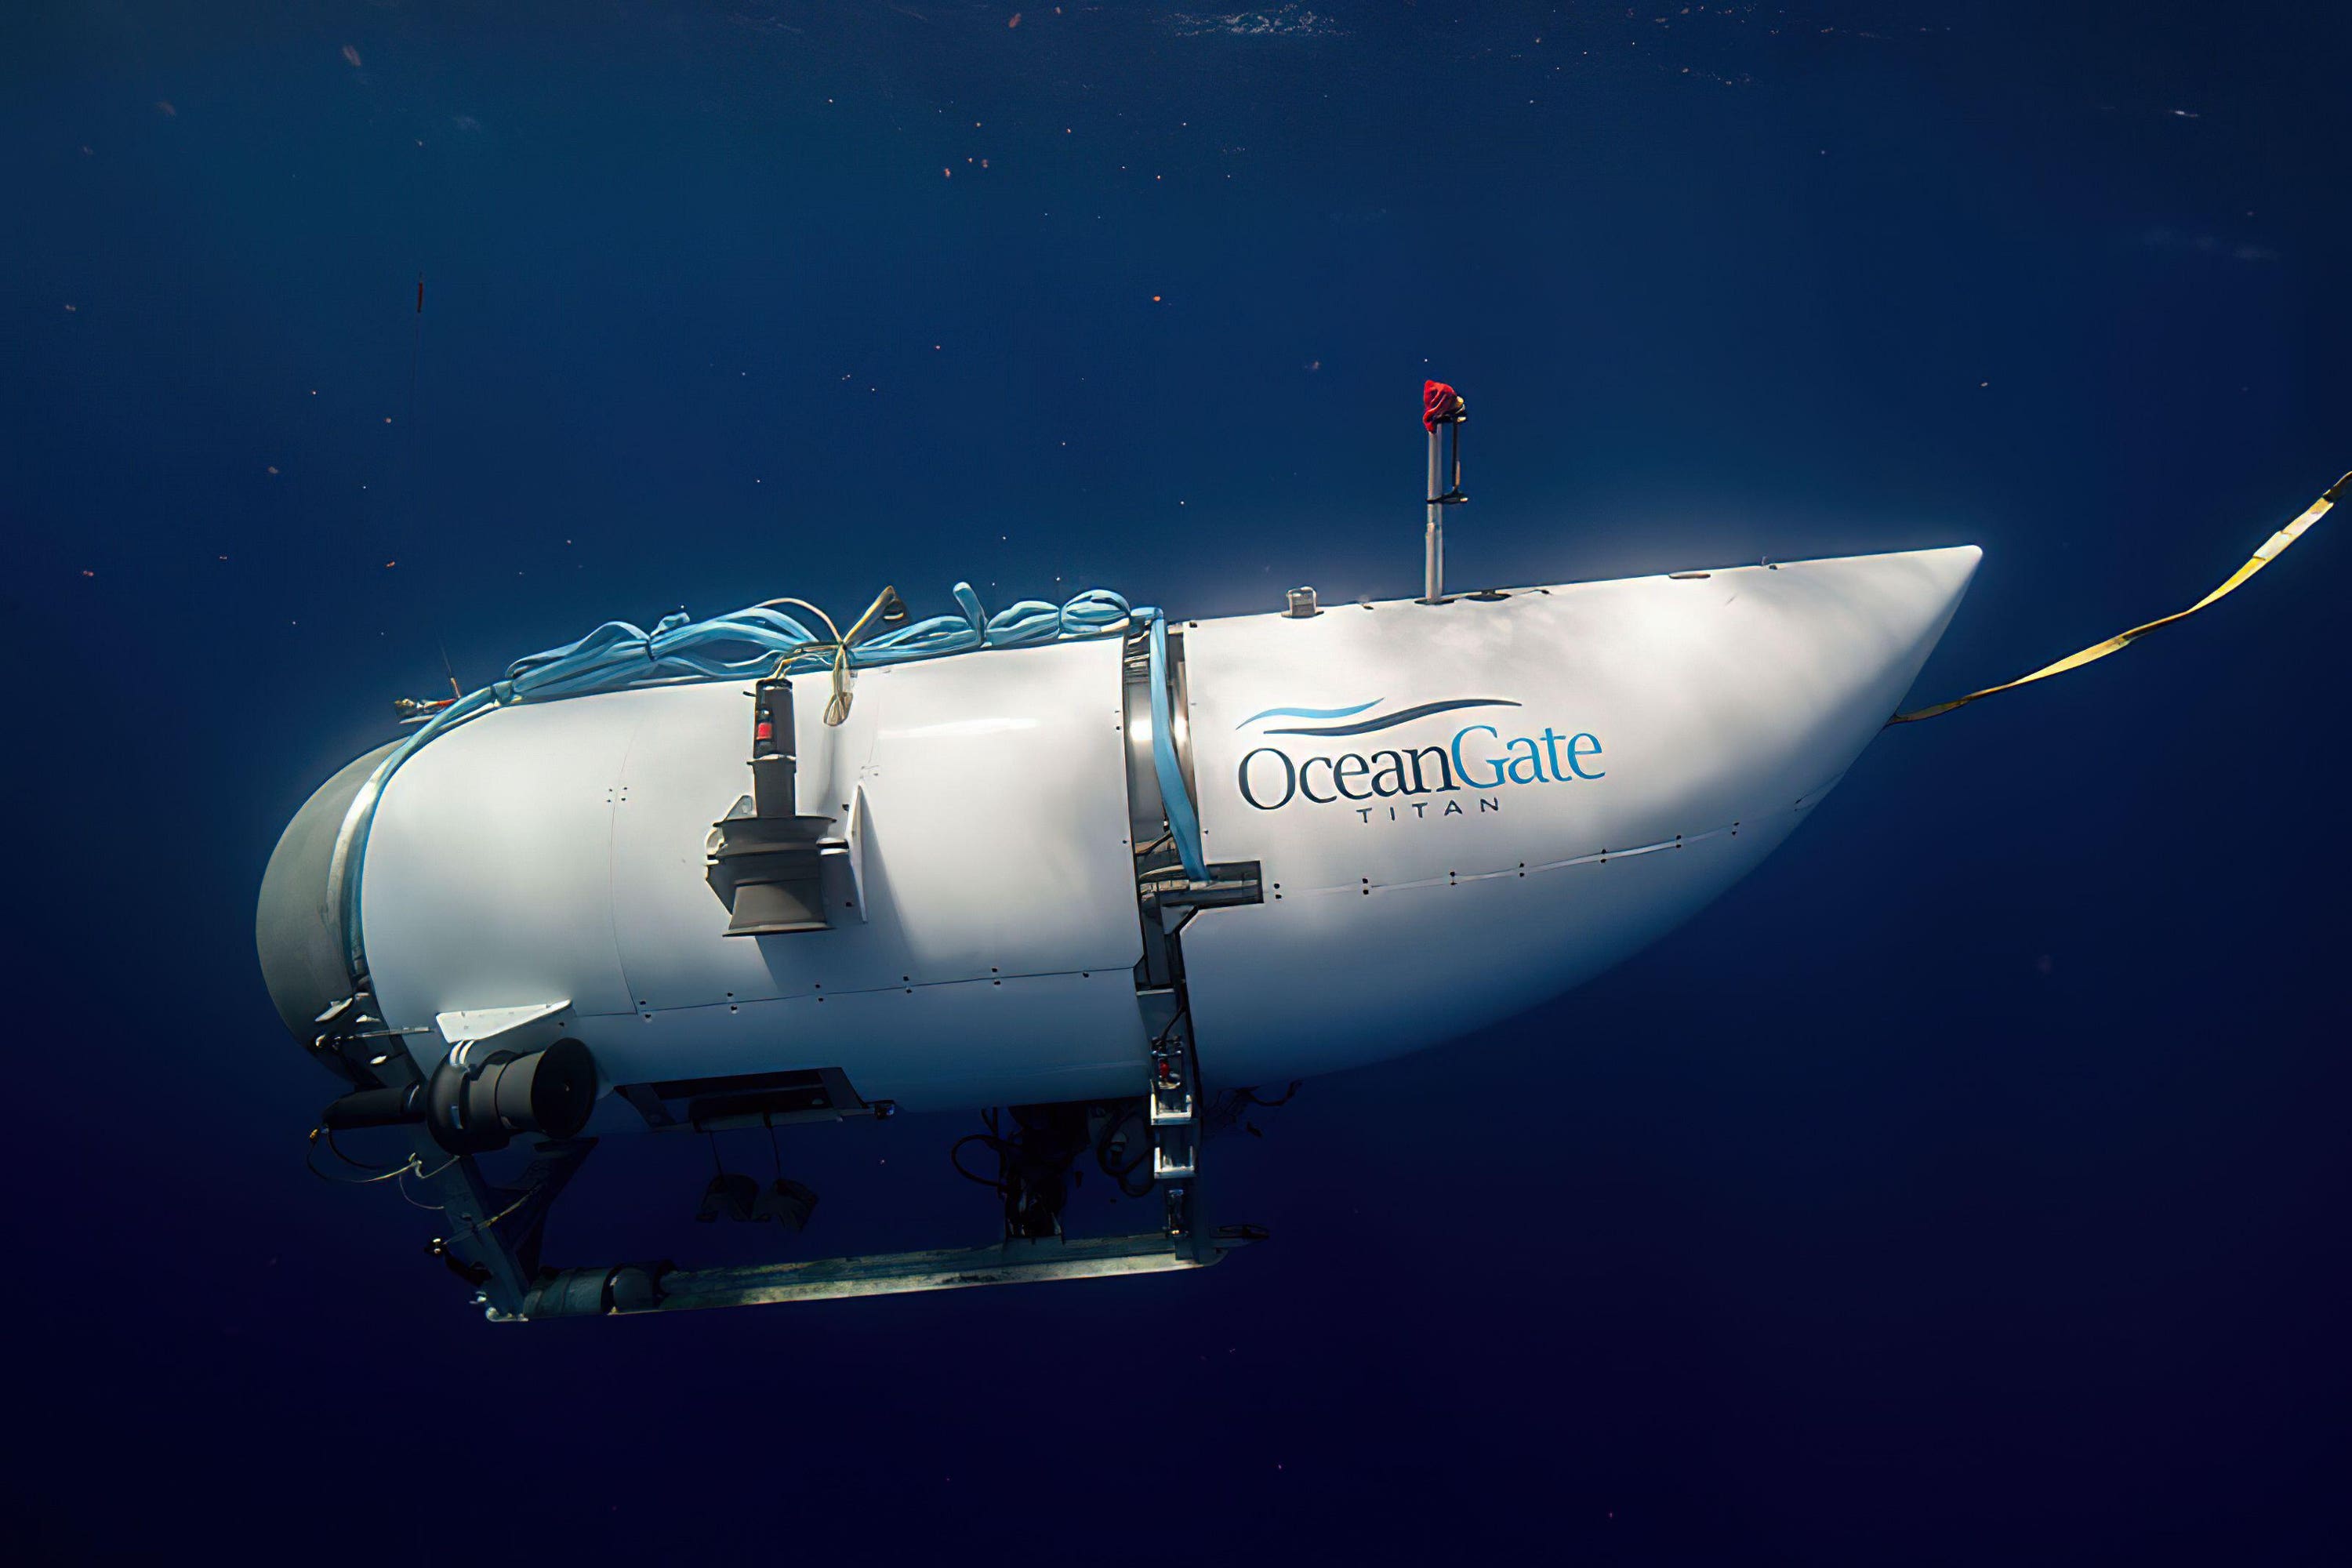 The OceanGate Expeditions submersible vessel named Titan used to visit the wreckage site of the Titanic